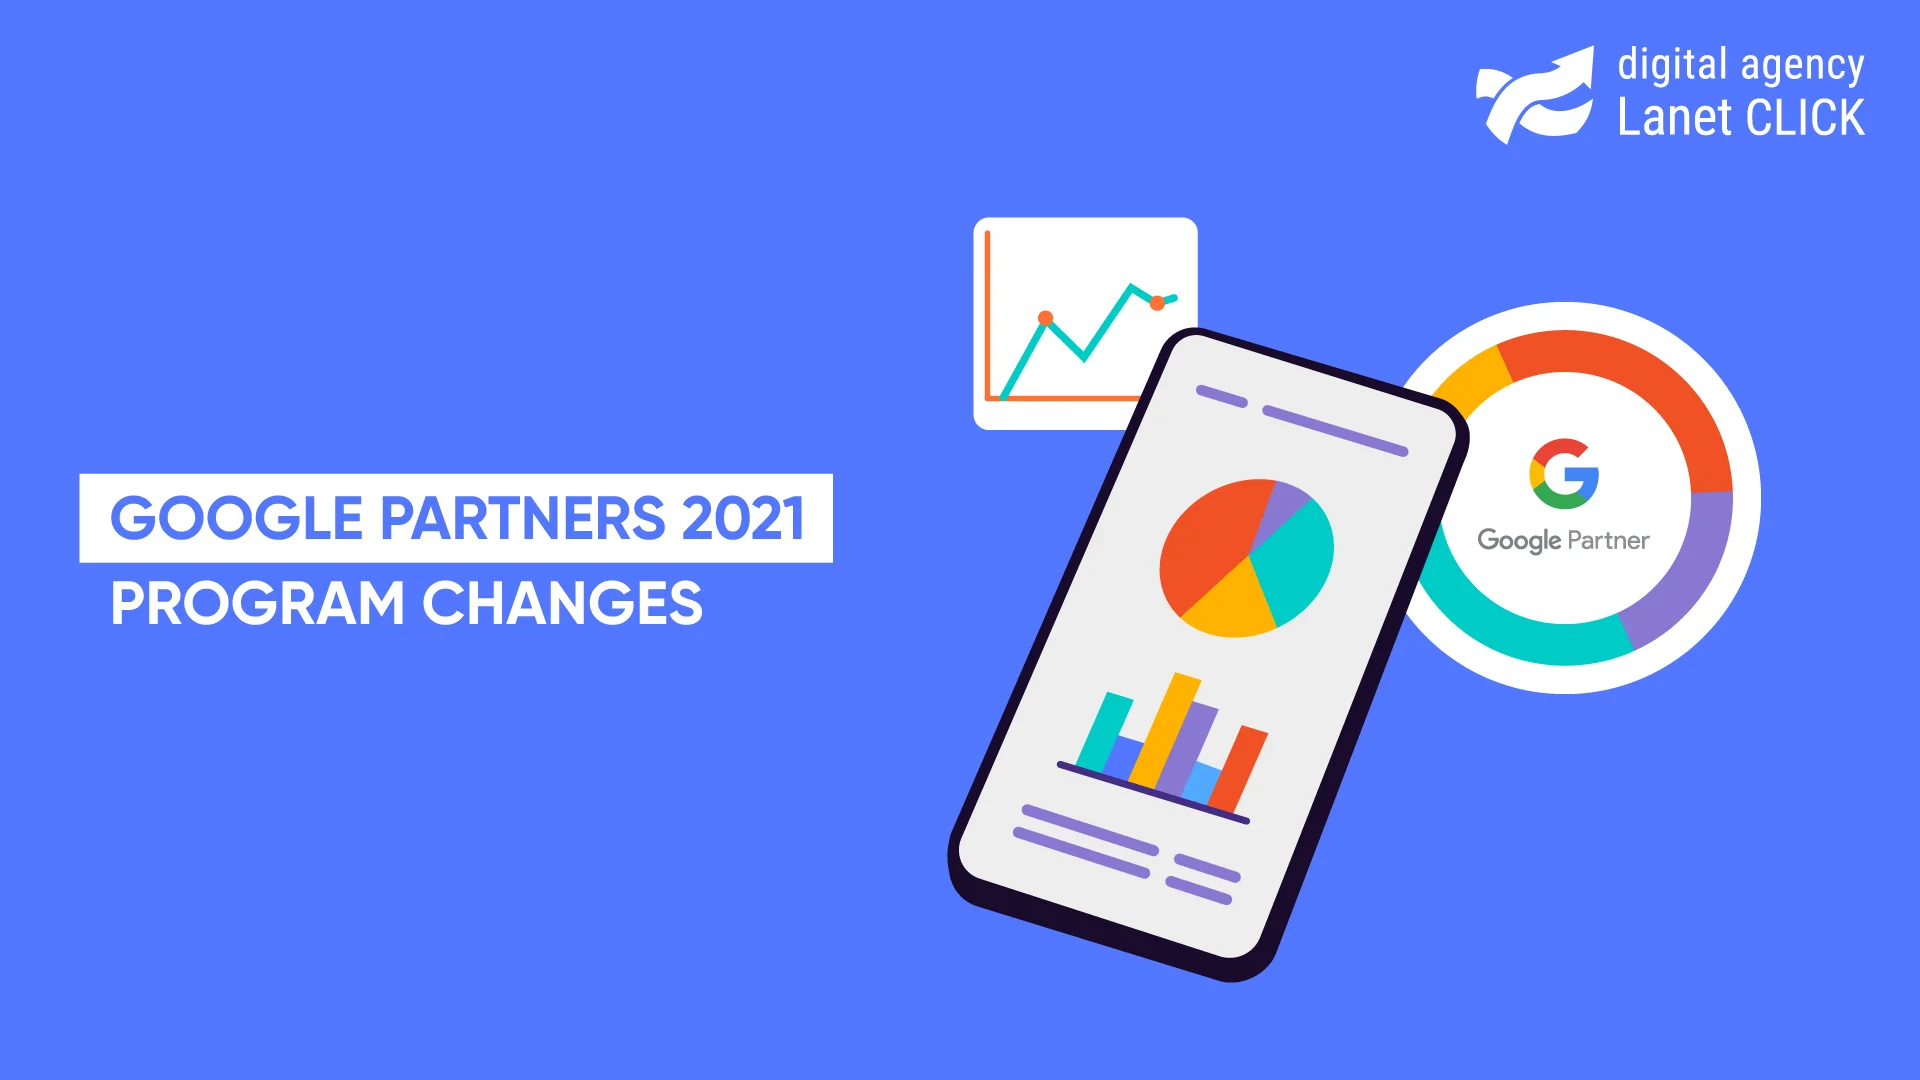 Changes to the Google Partners 2021 program